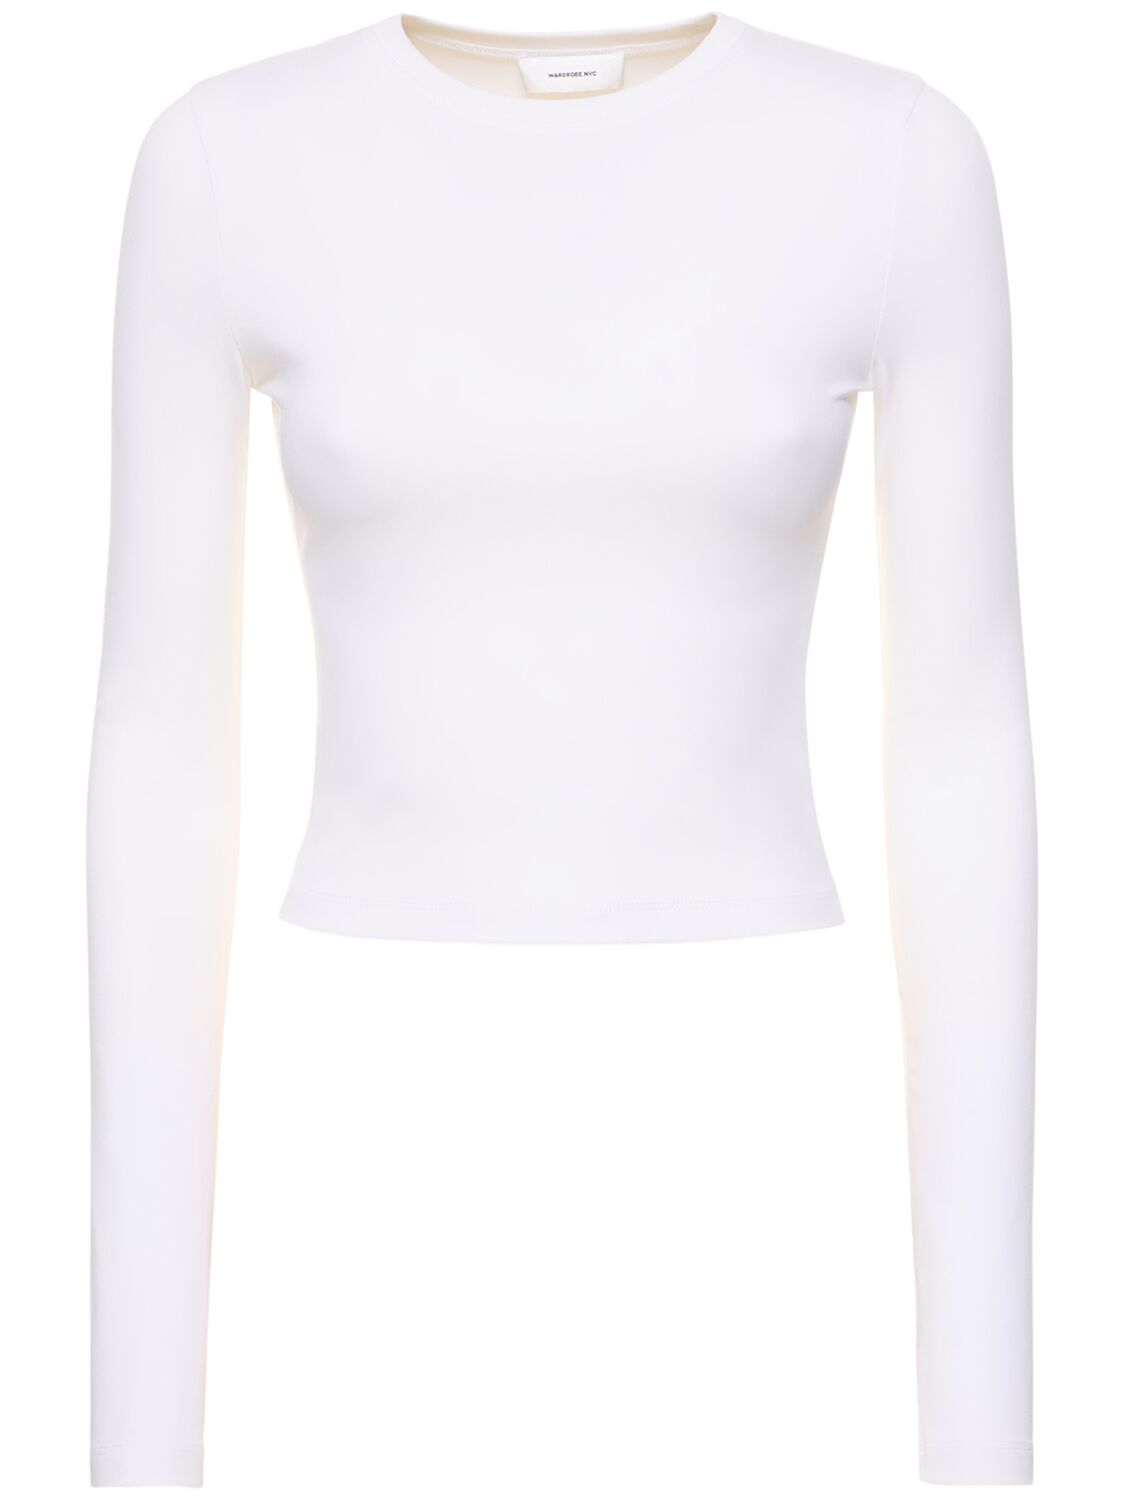 Wardrobe.nyc Opaque Stretch Jersey T-shirt In White